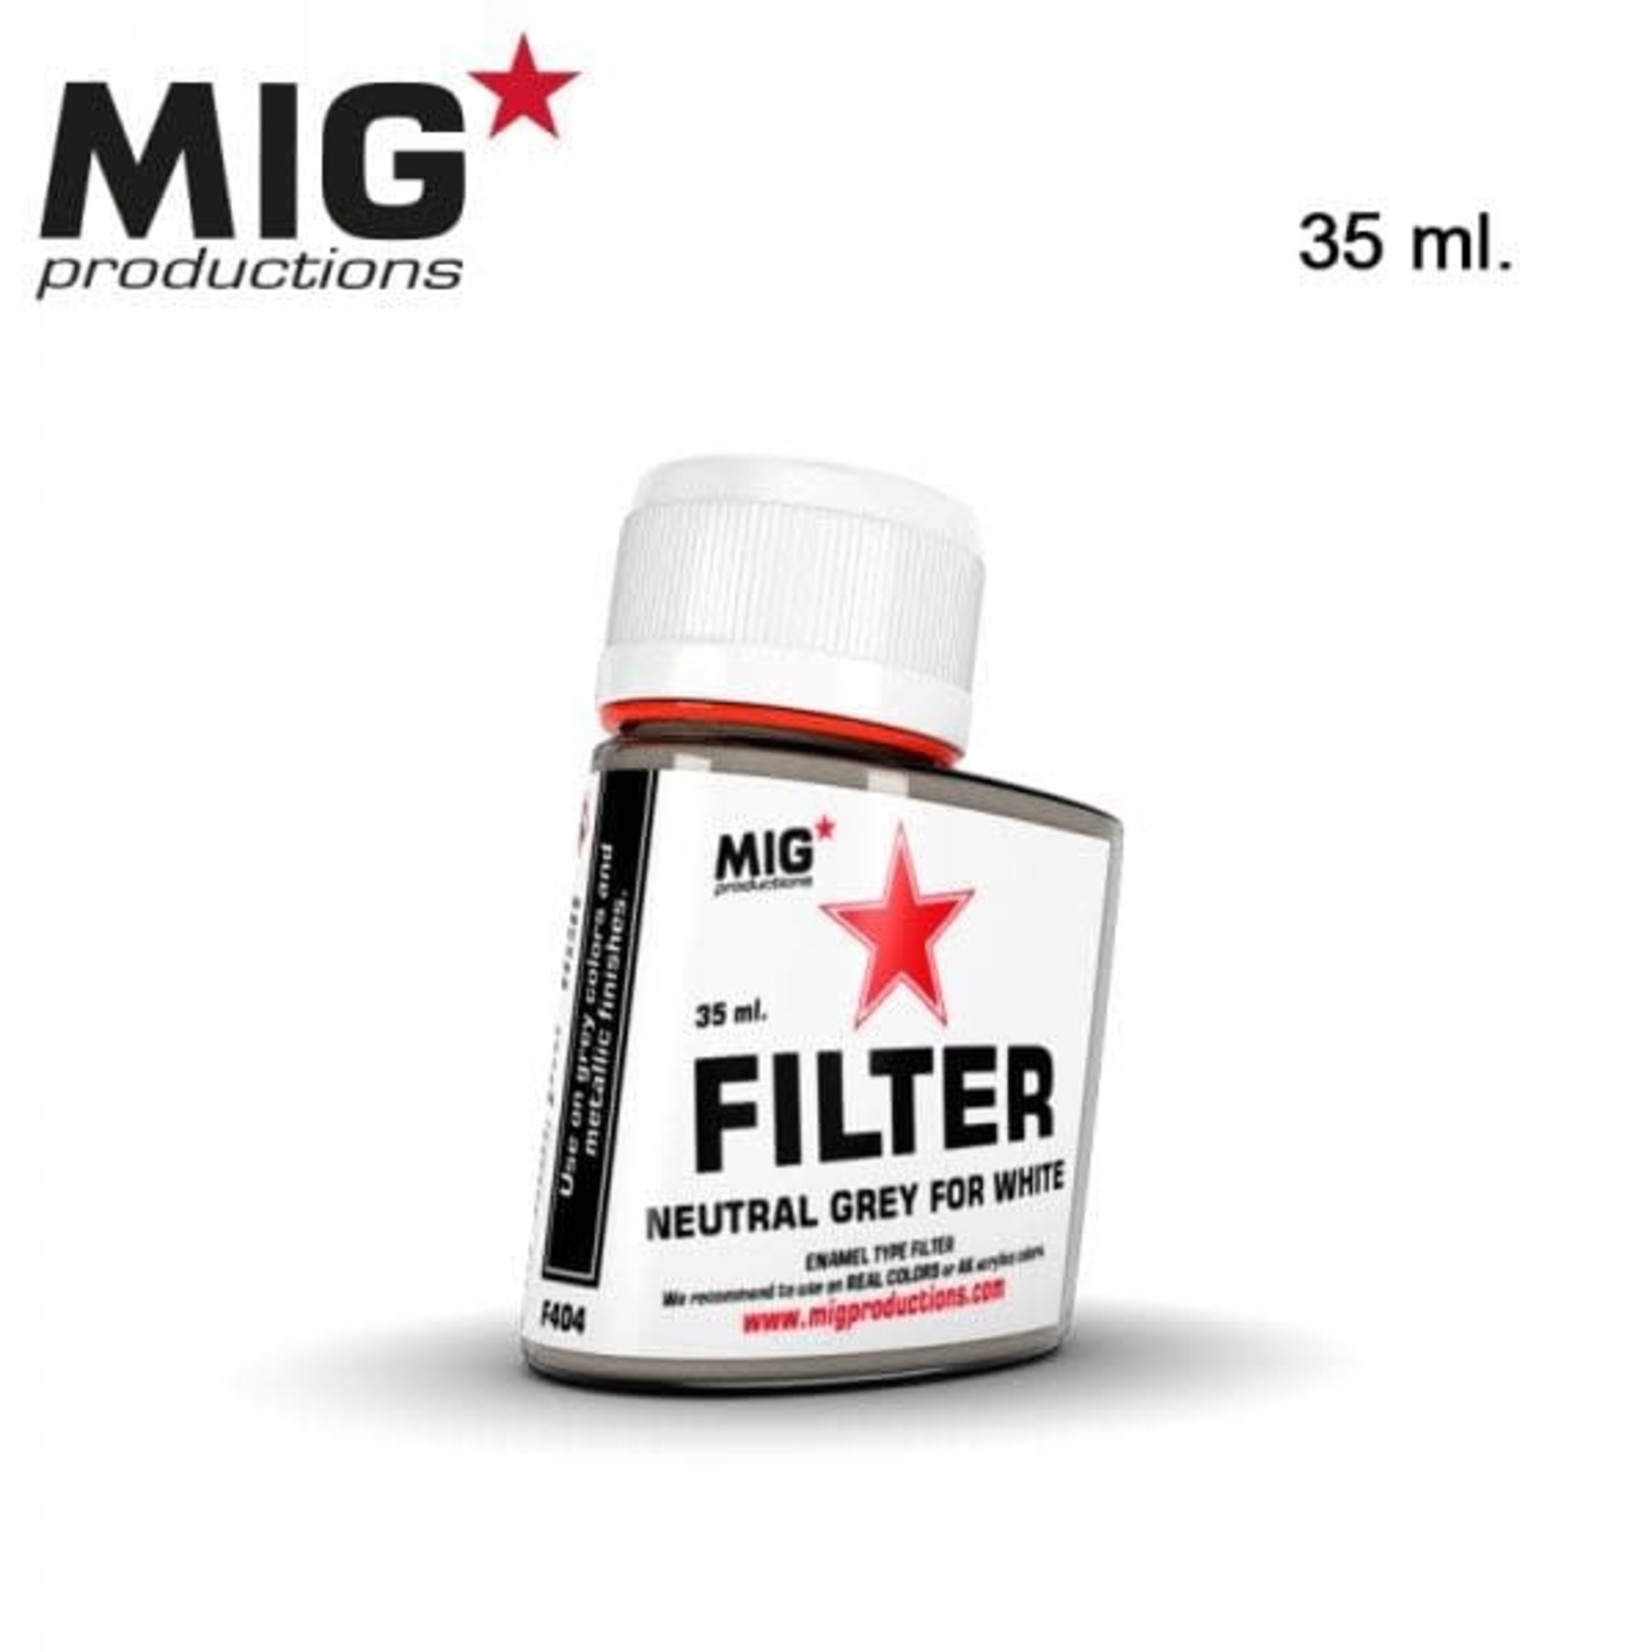 MIG Productions MIG Filter F-404 Neutral Grey for White 35ml